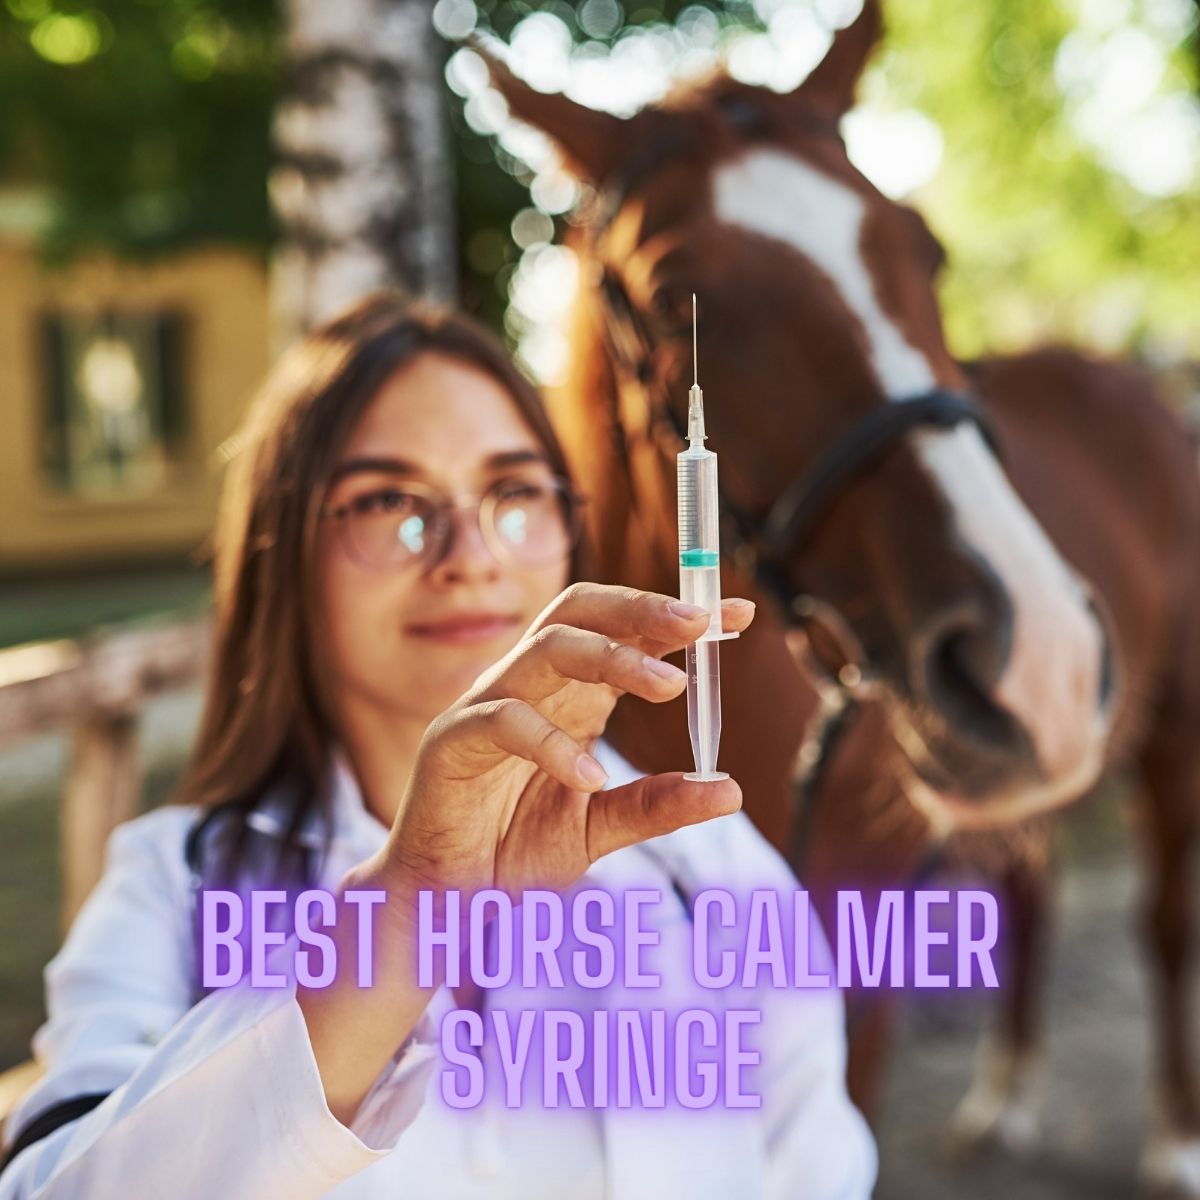 Best Horse Calmer Syringe: Top Choices for Equestrian Ease